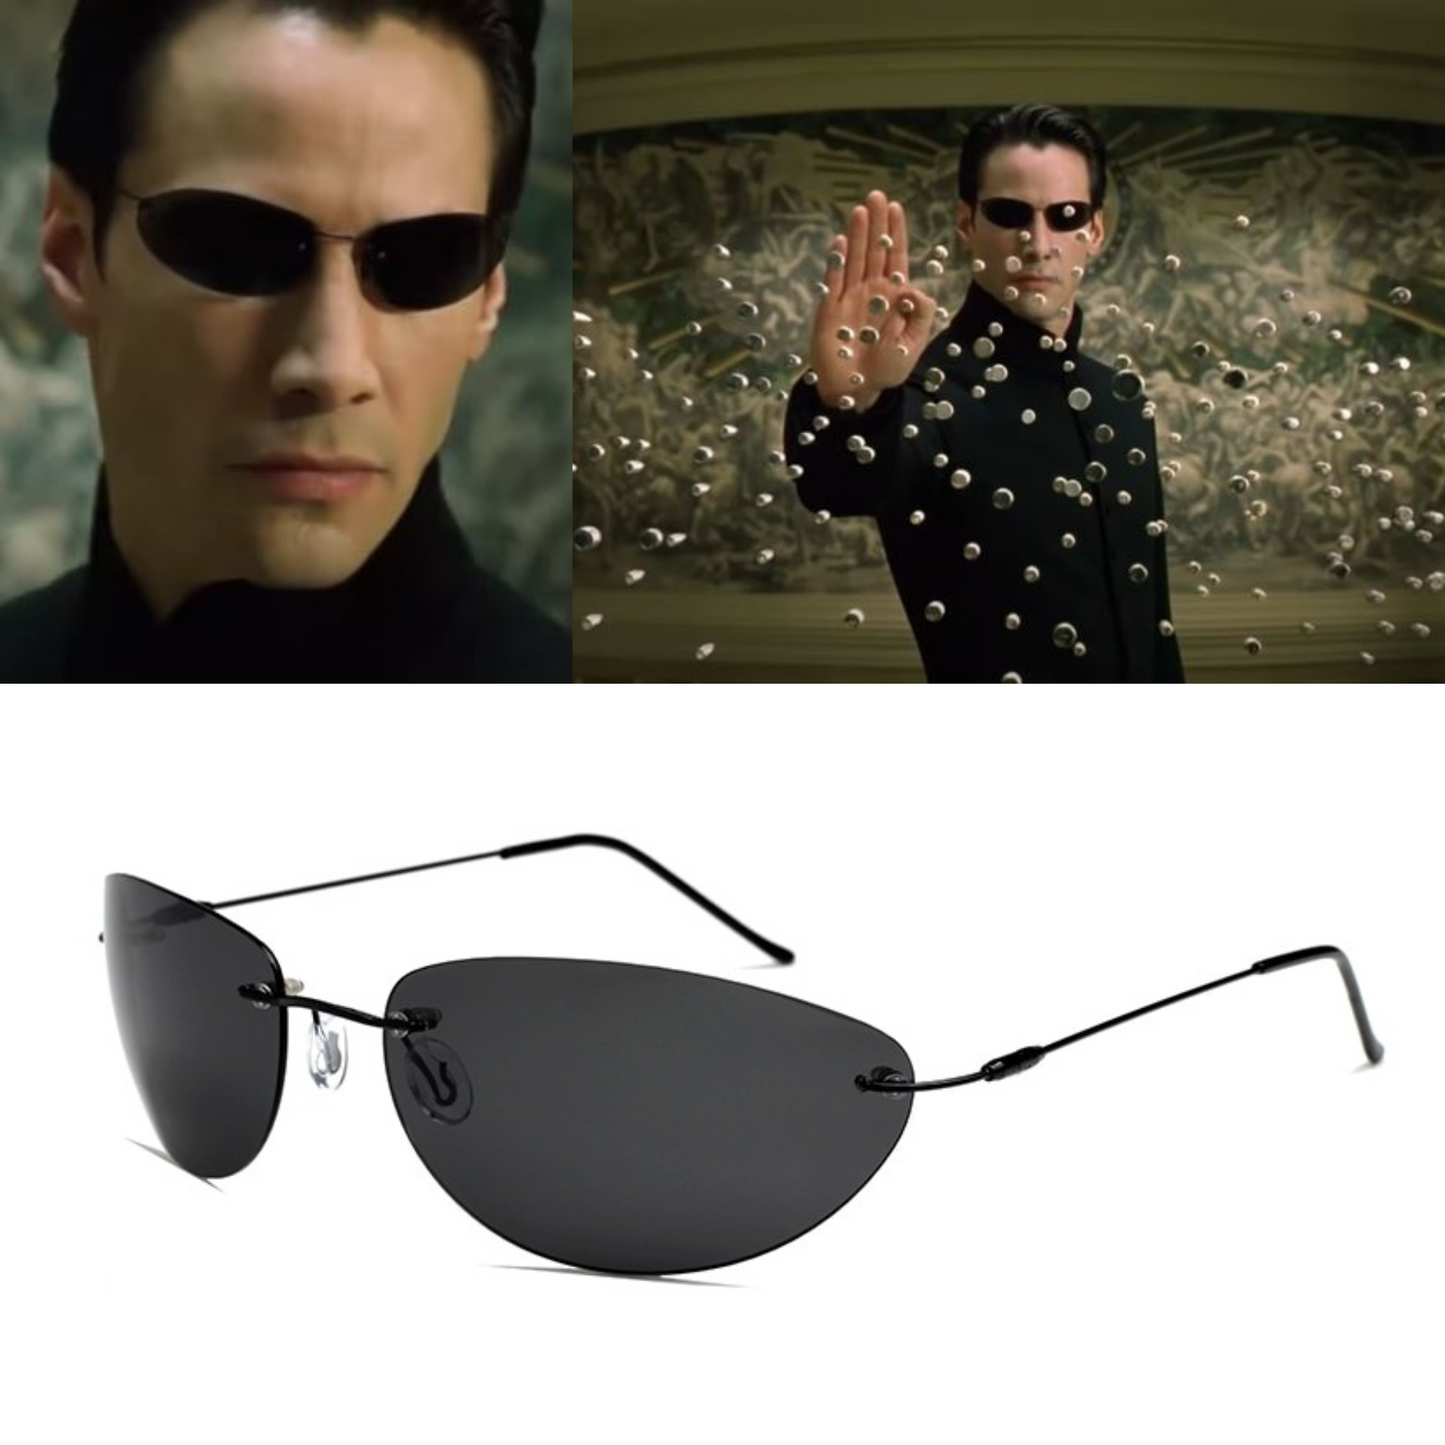 The Matrix - Neo Classical Style - Polarized Sunglasses - Ultralight Rimless Design - Driving Glasses - Black Out Mirror - Movie Prop Cosplay-Matrix Neo Style-